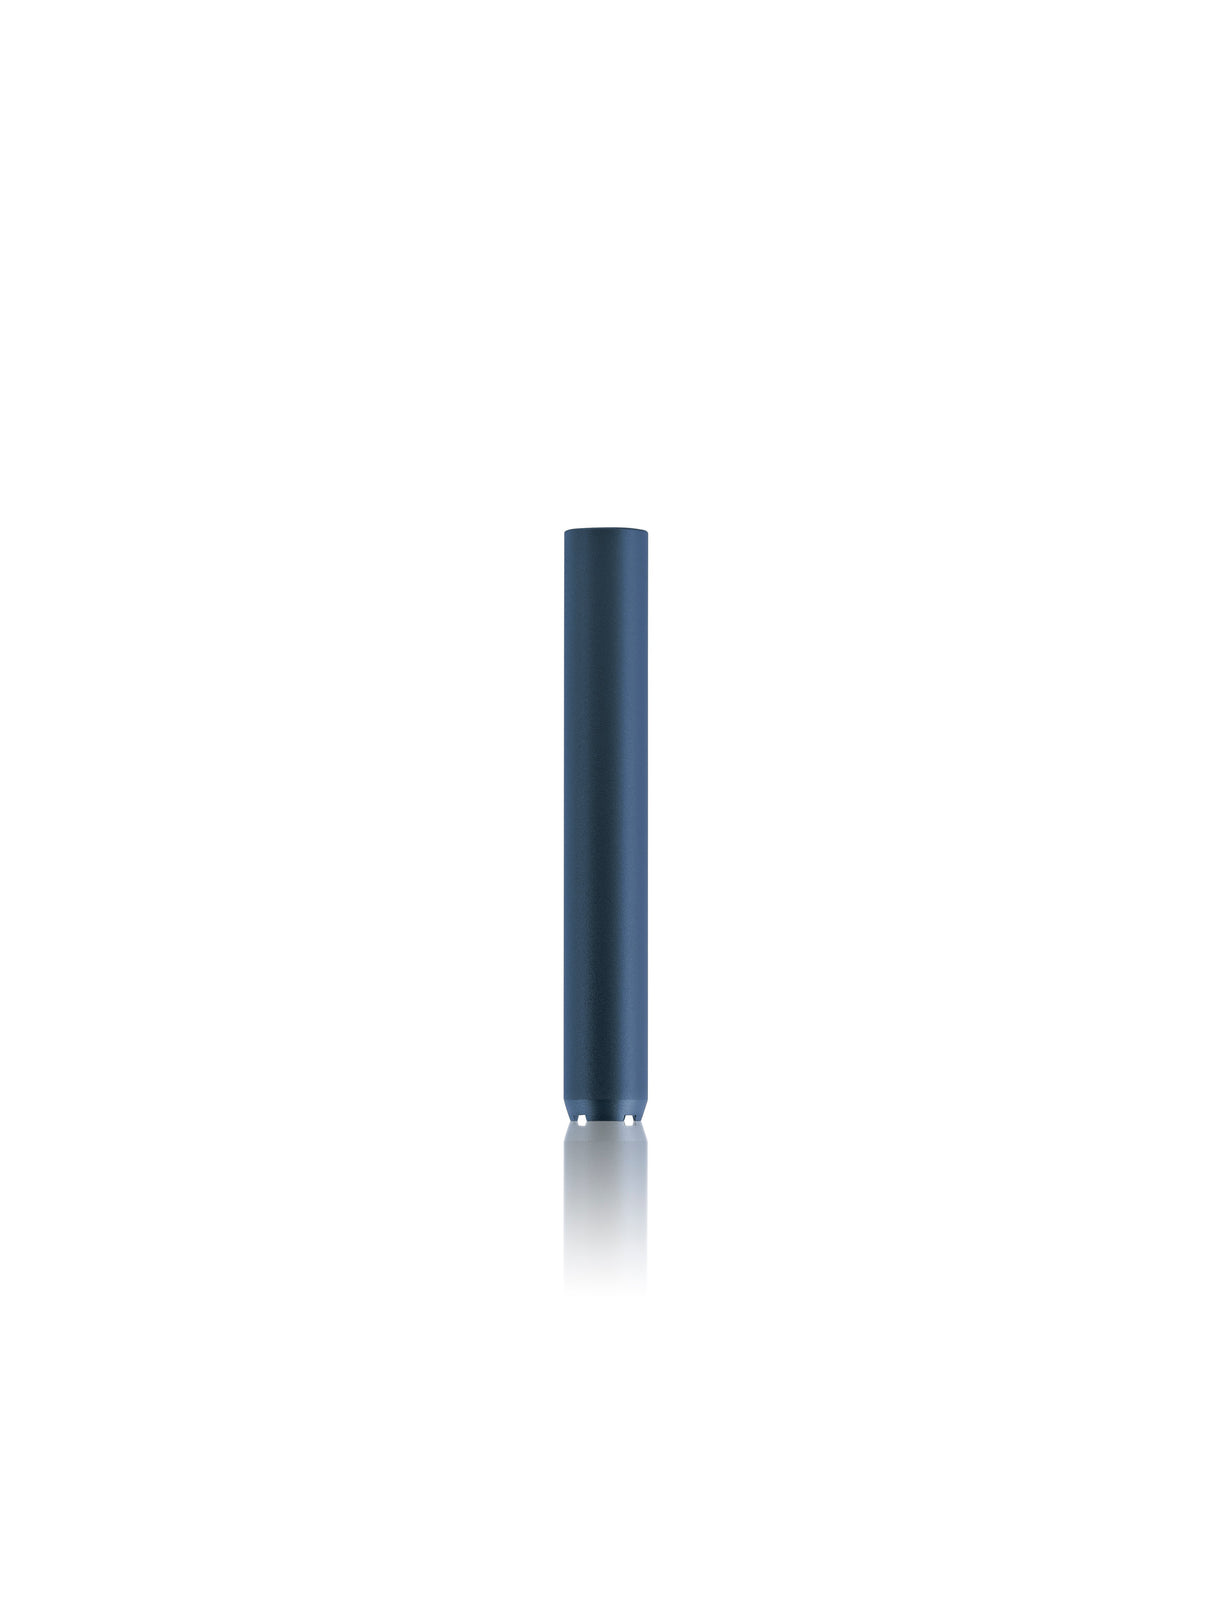 GRAV Dugout Taster in Midnight Blue, Aluminum Hand Pipe, Front View on White Background